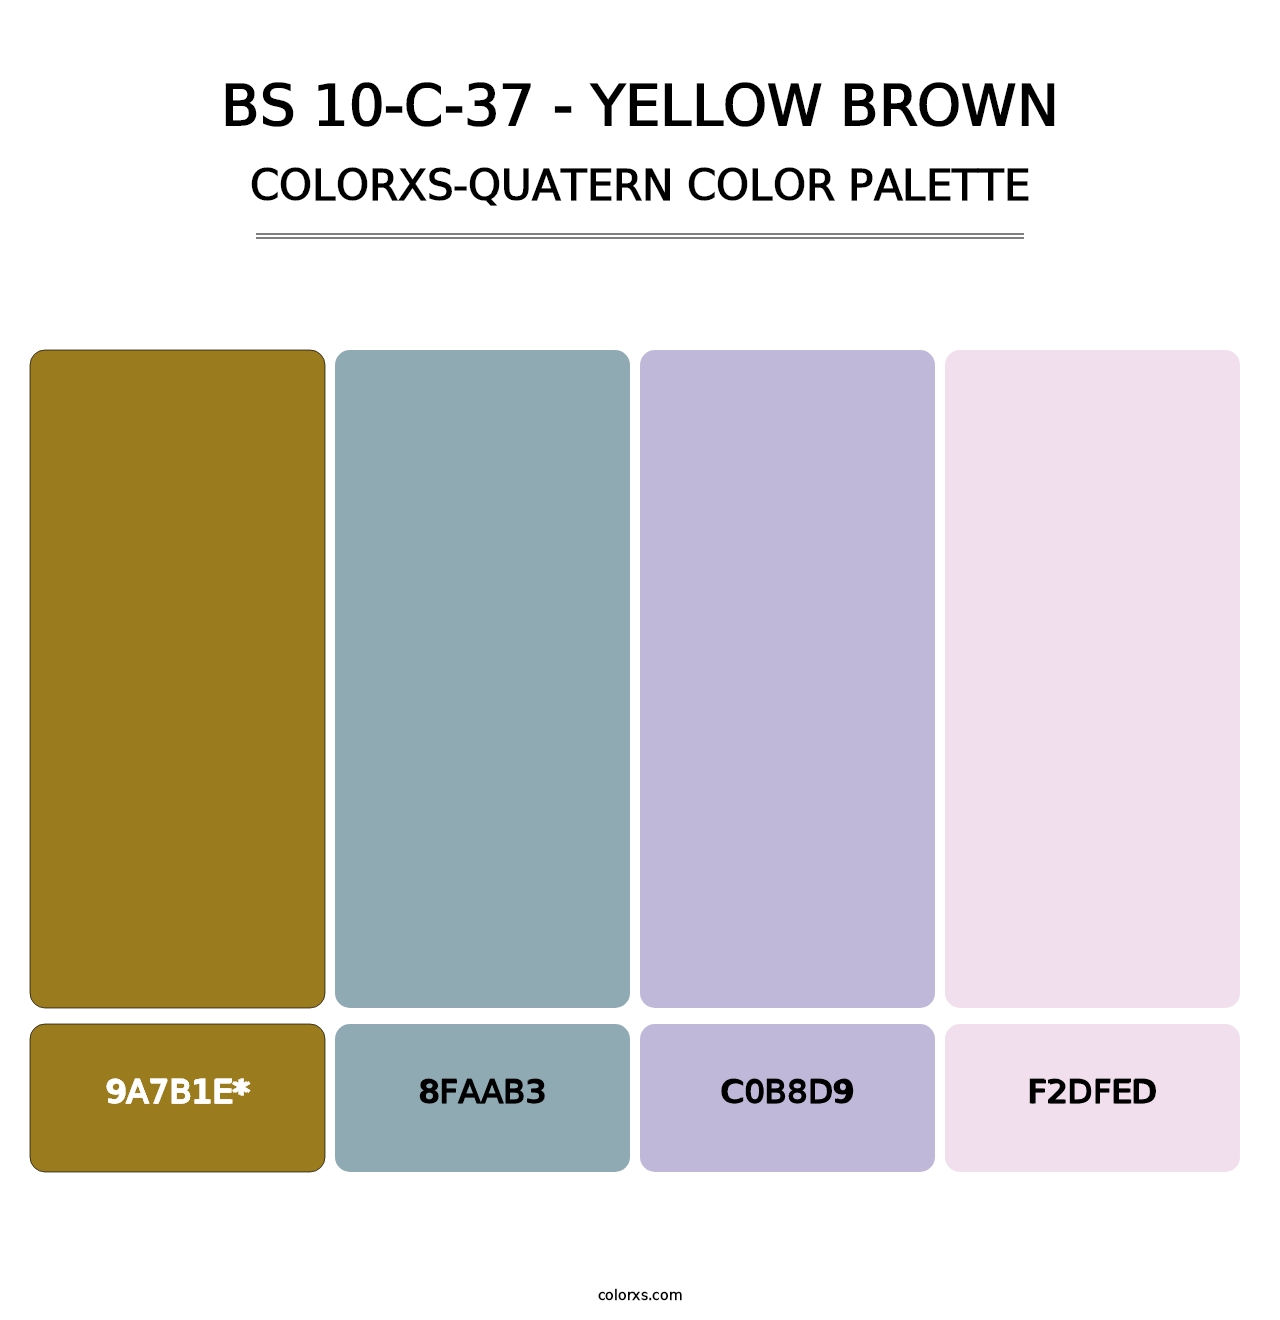 BS 10-C-37 - Yellow Brown - Colorxs Quatern Palette